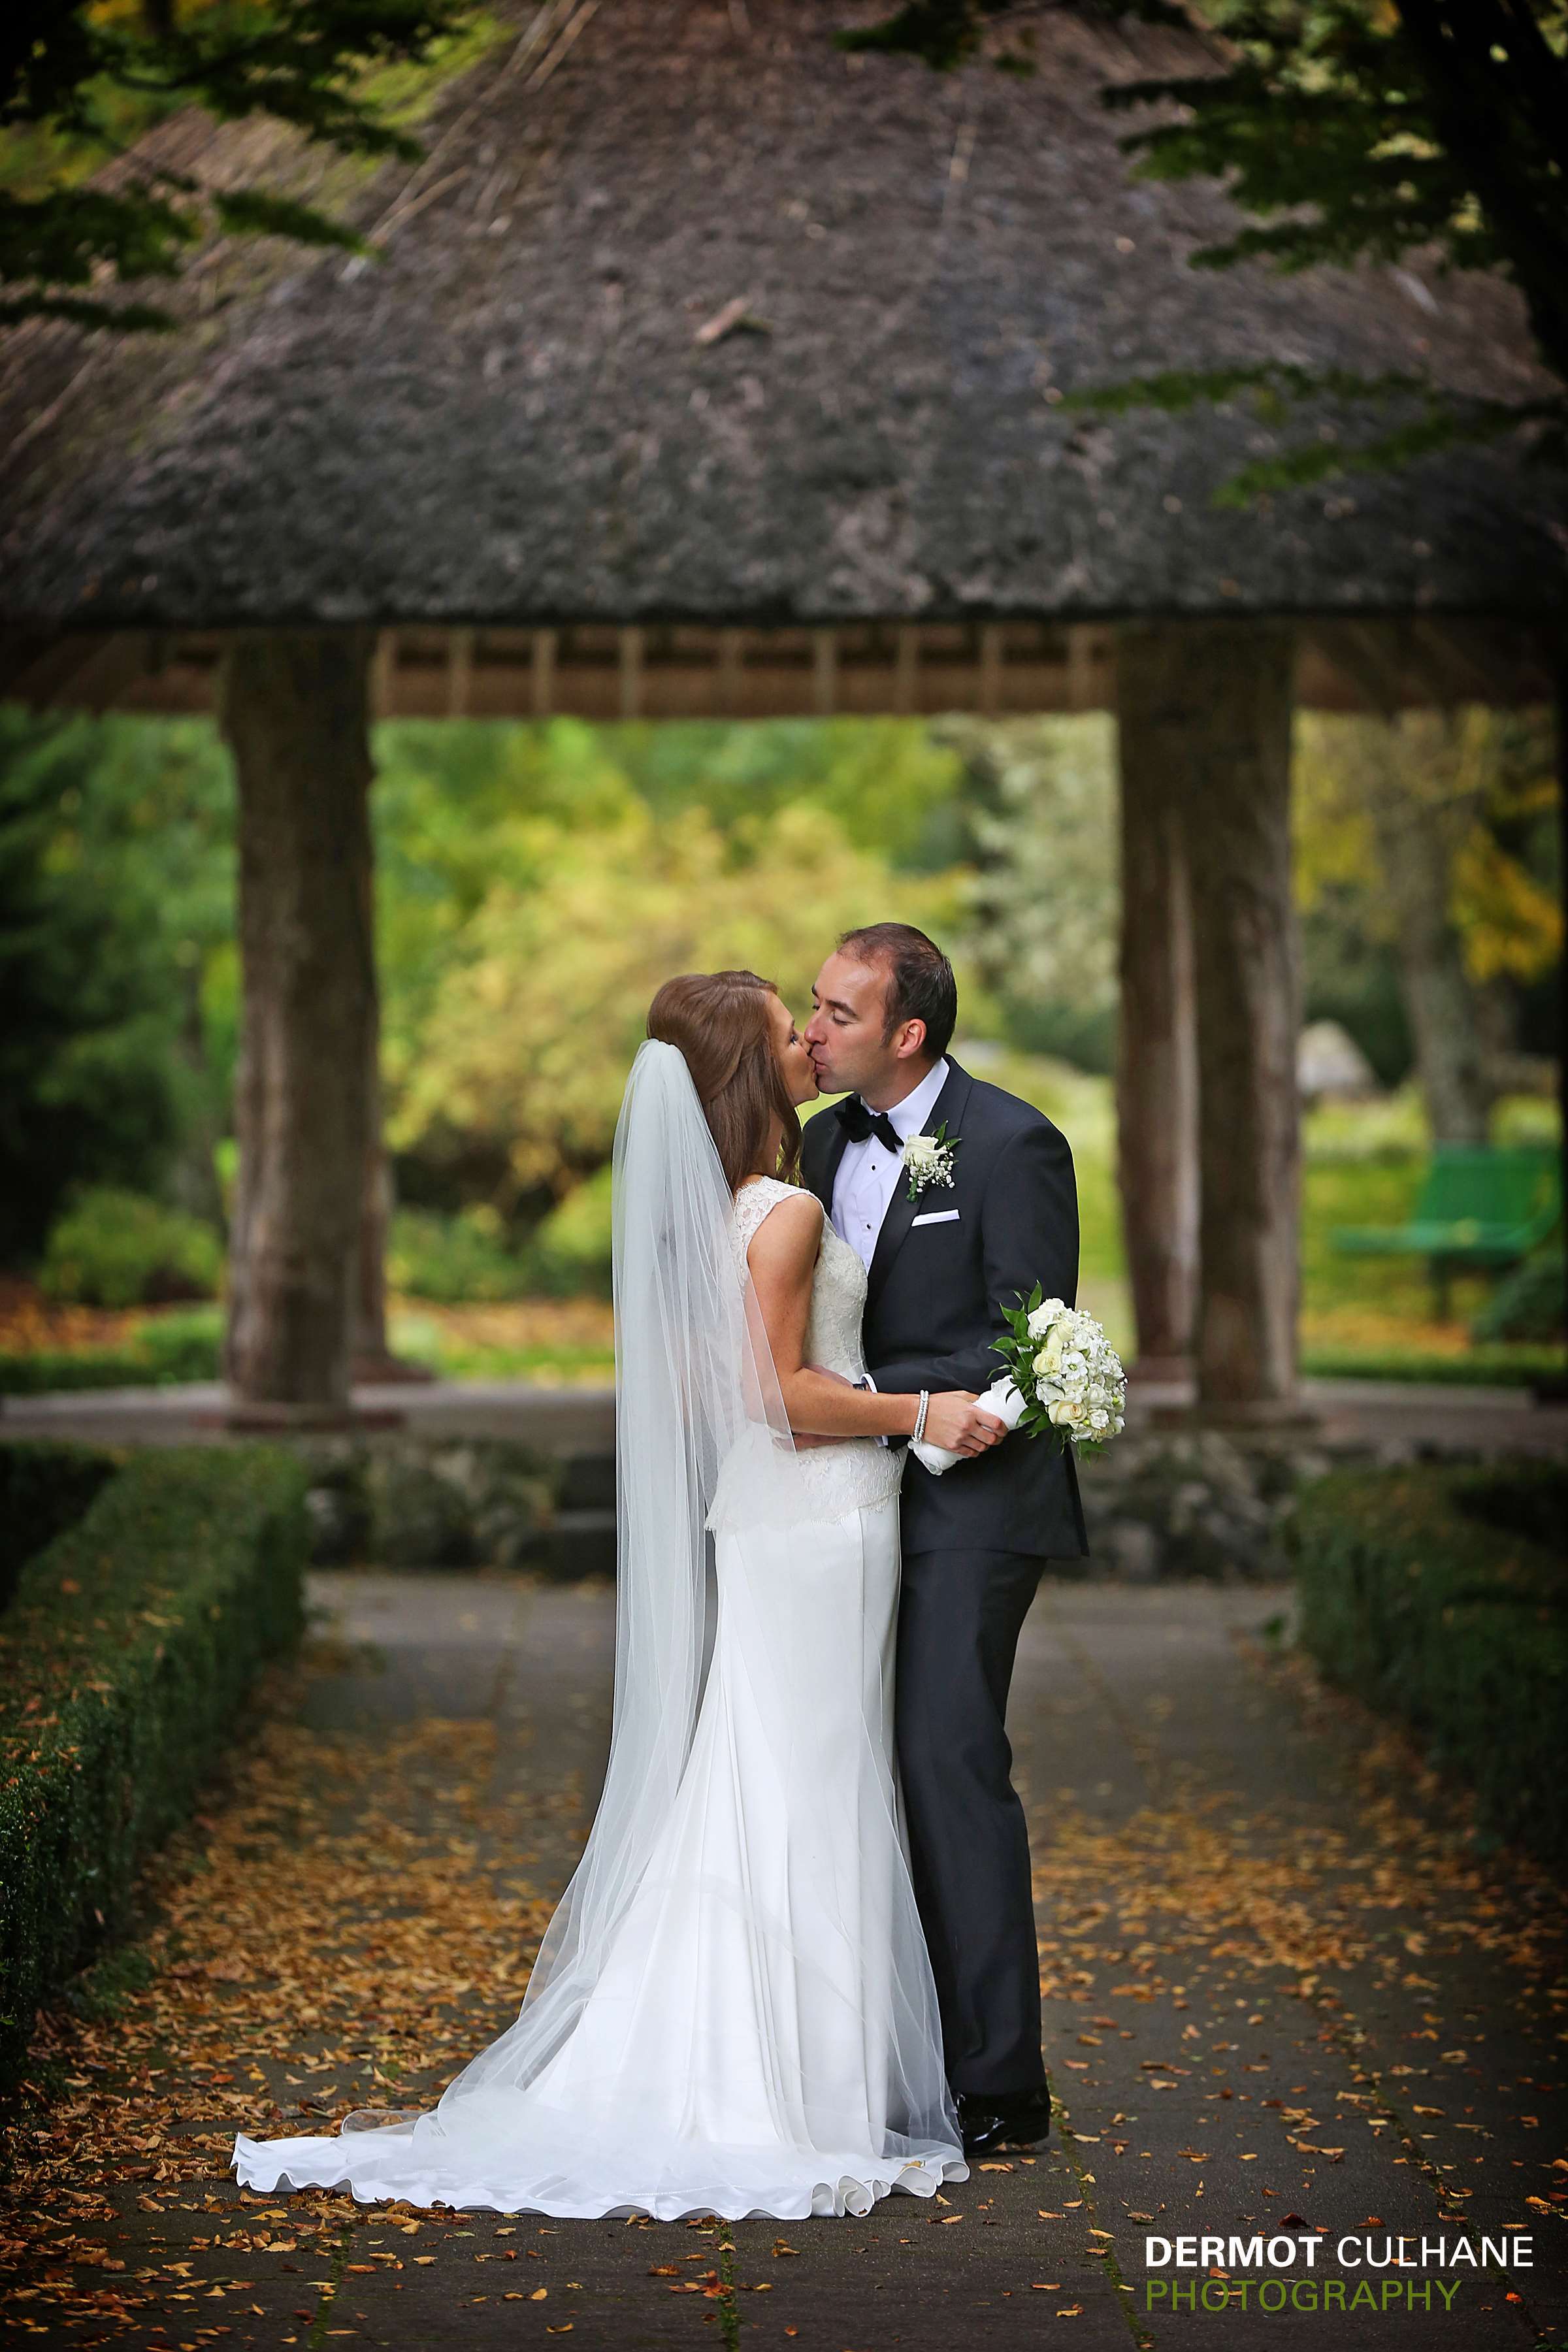 Bride and Groom Kissing at Dunraven Arms Wedding Venue in Adare